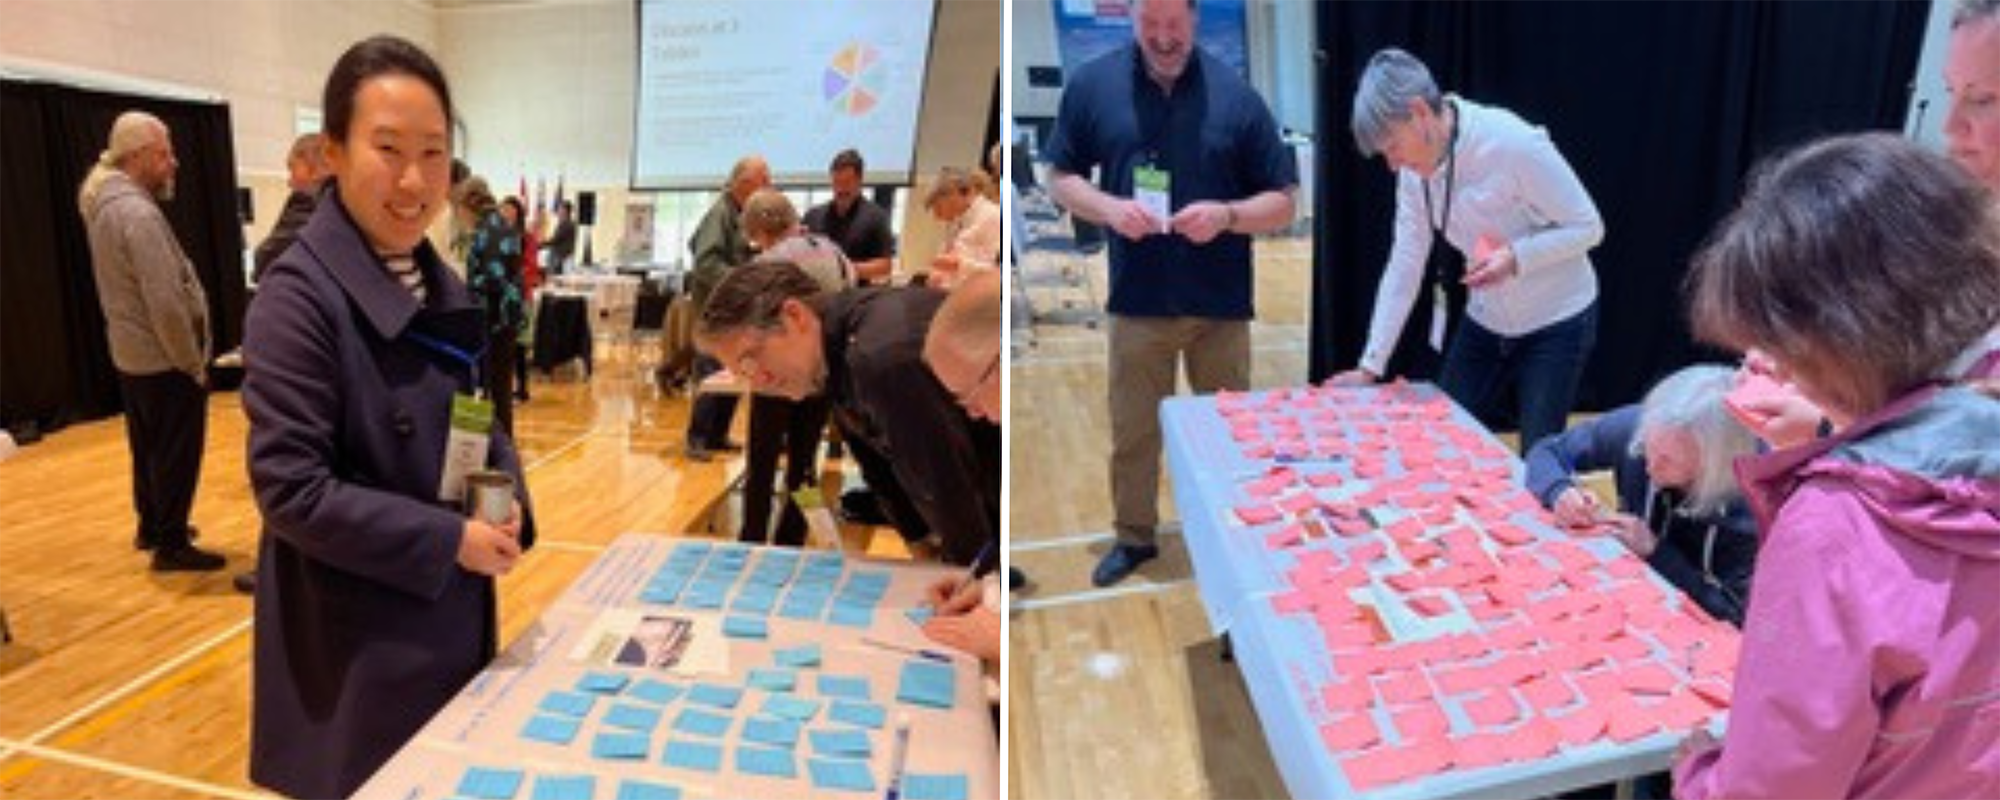 Two image collage. Left side is a woman at a dialogue in front of a table of sticky notes. Right side is a group of people at a dialogue standing around a table of sticky notes.